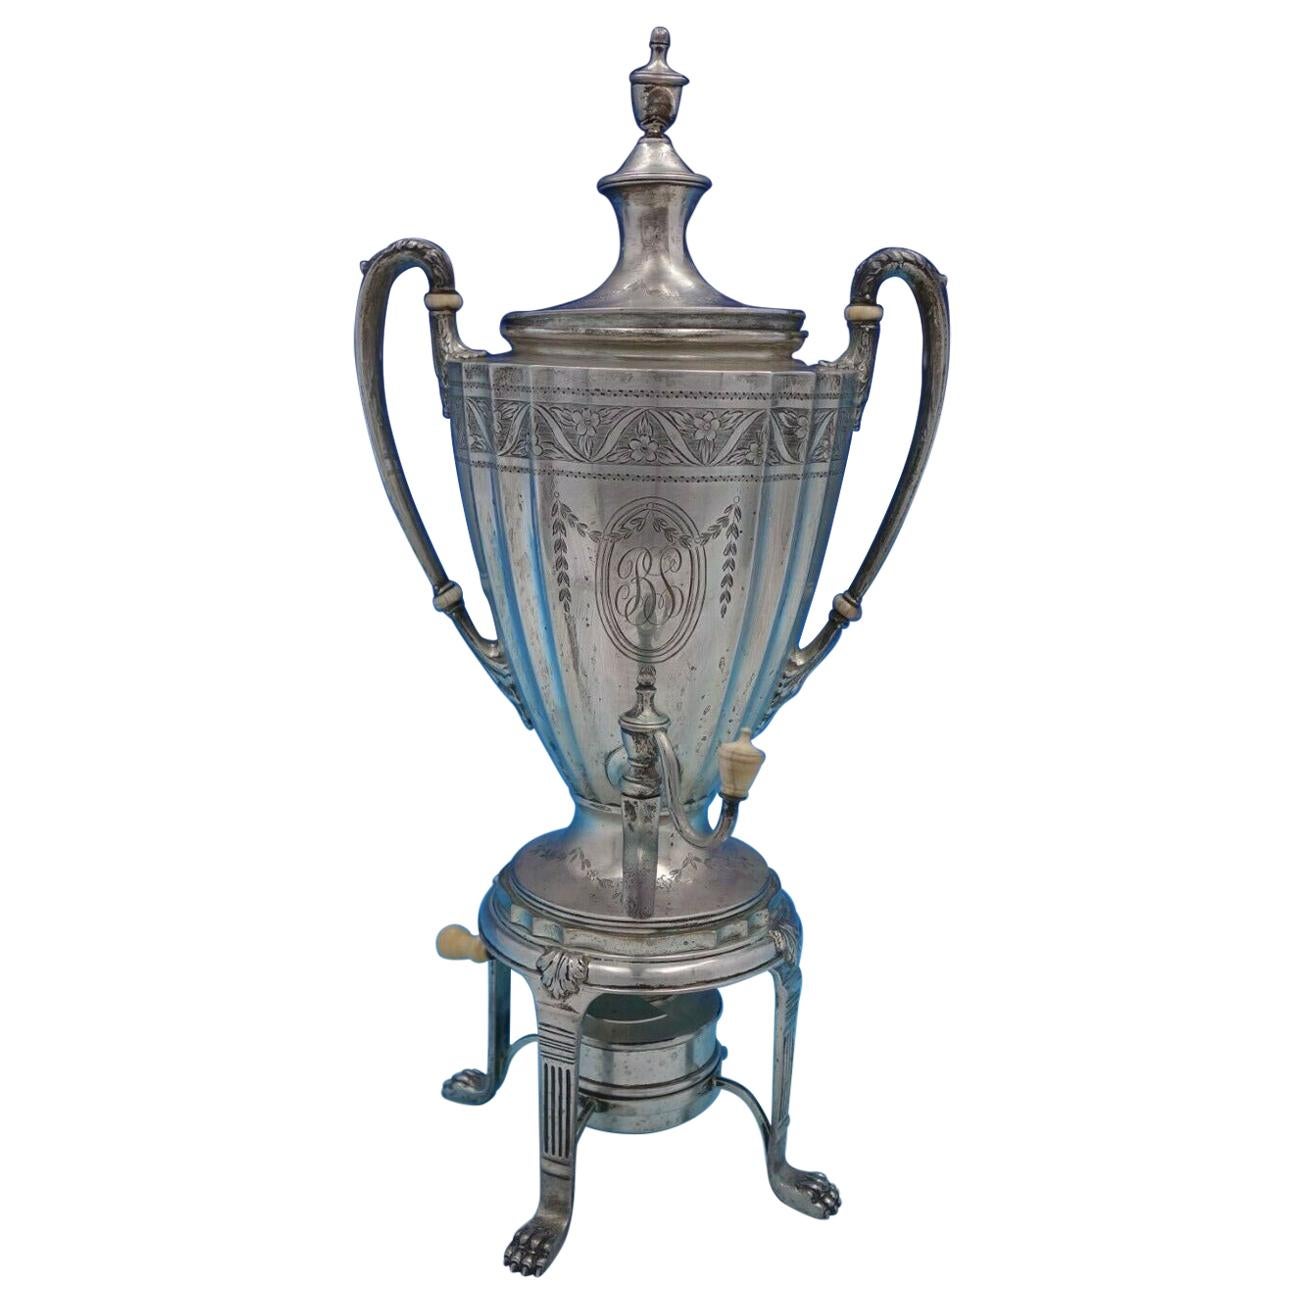 Marie Antoinette Chased by Dominick & Haff Sterling Silver Coffee Urn